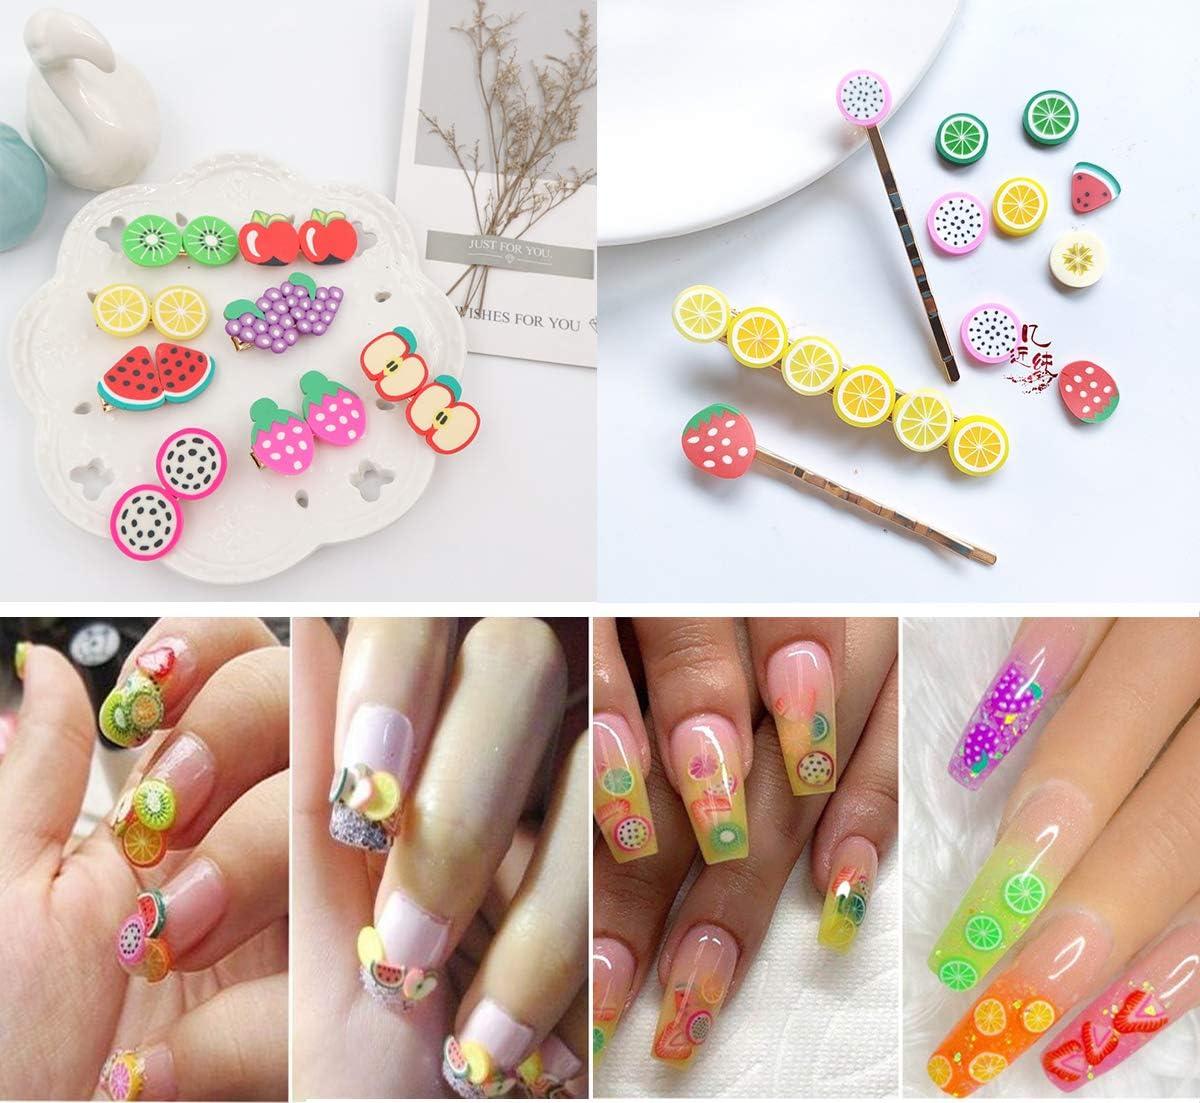 Duufin 10500 Pcs Nail Art Slices Fruits Slices Polymer Nail 3D Slice  Colorful DIY Nail Art Supplies with a Tweezers for DIY Crafts, Slime Making  and Cellphone Decoration